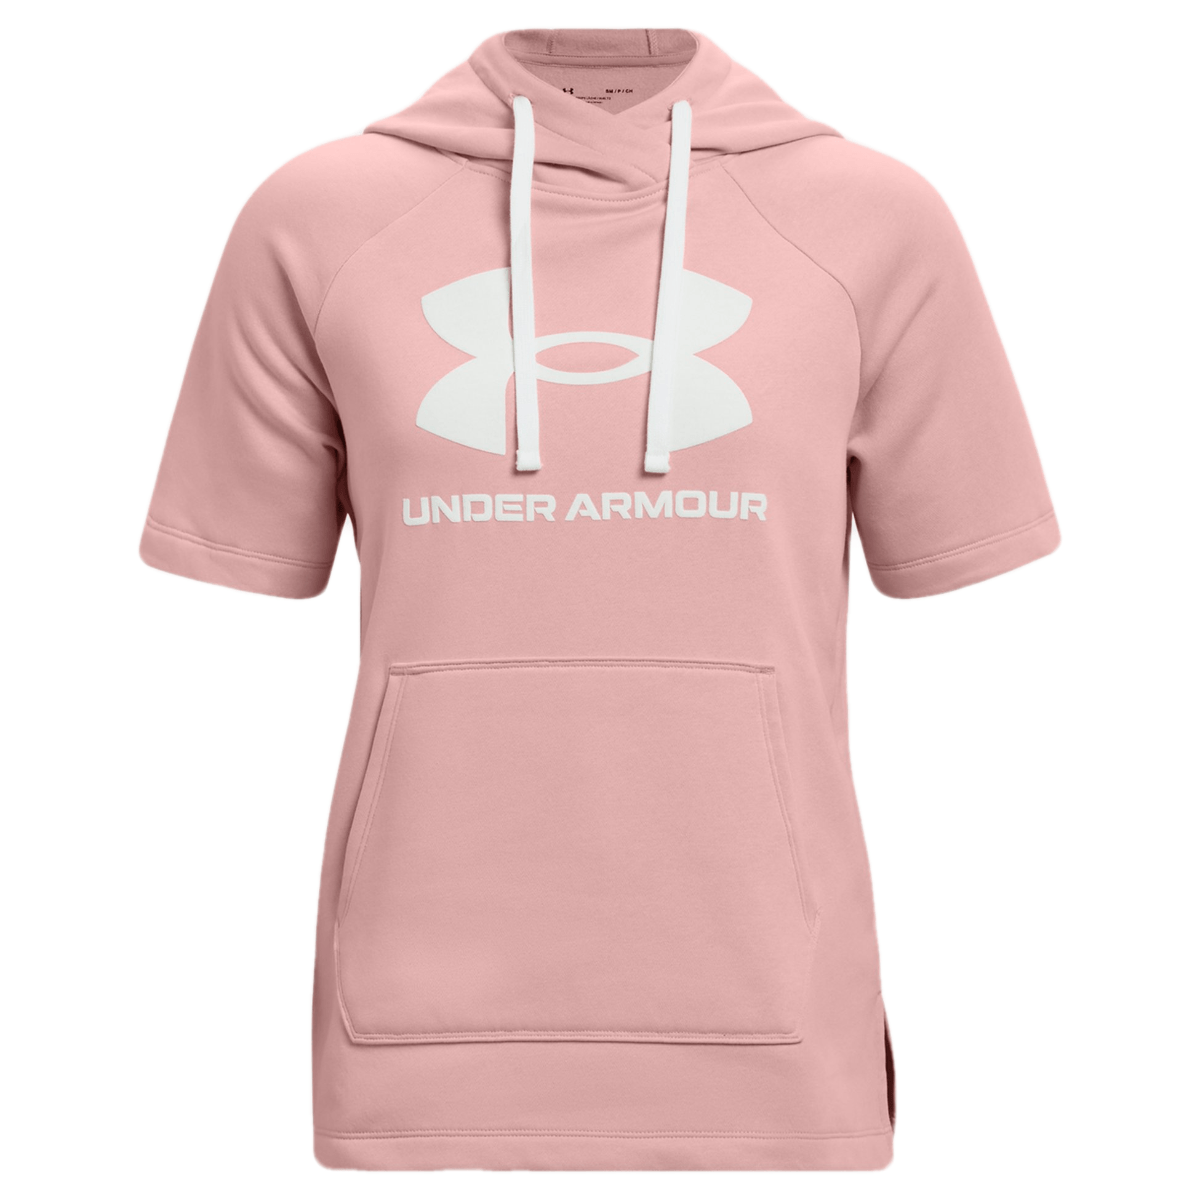 Under Armour, Tops, Under Armour Dark Pink Thin Fleece Lining Hoodie  Womens Small